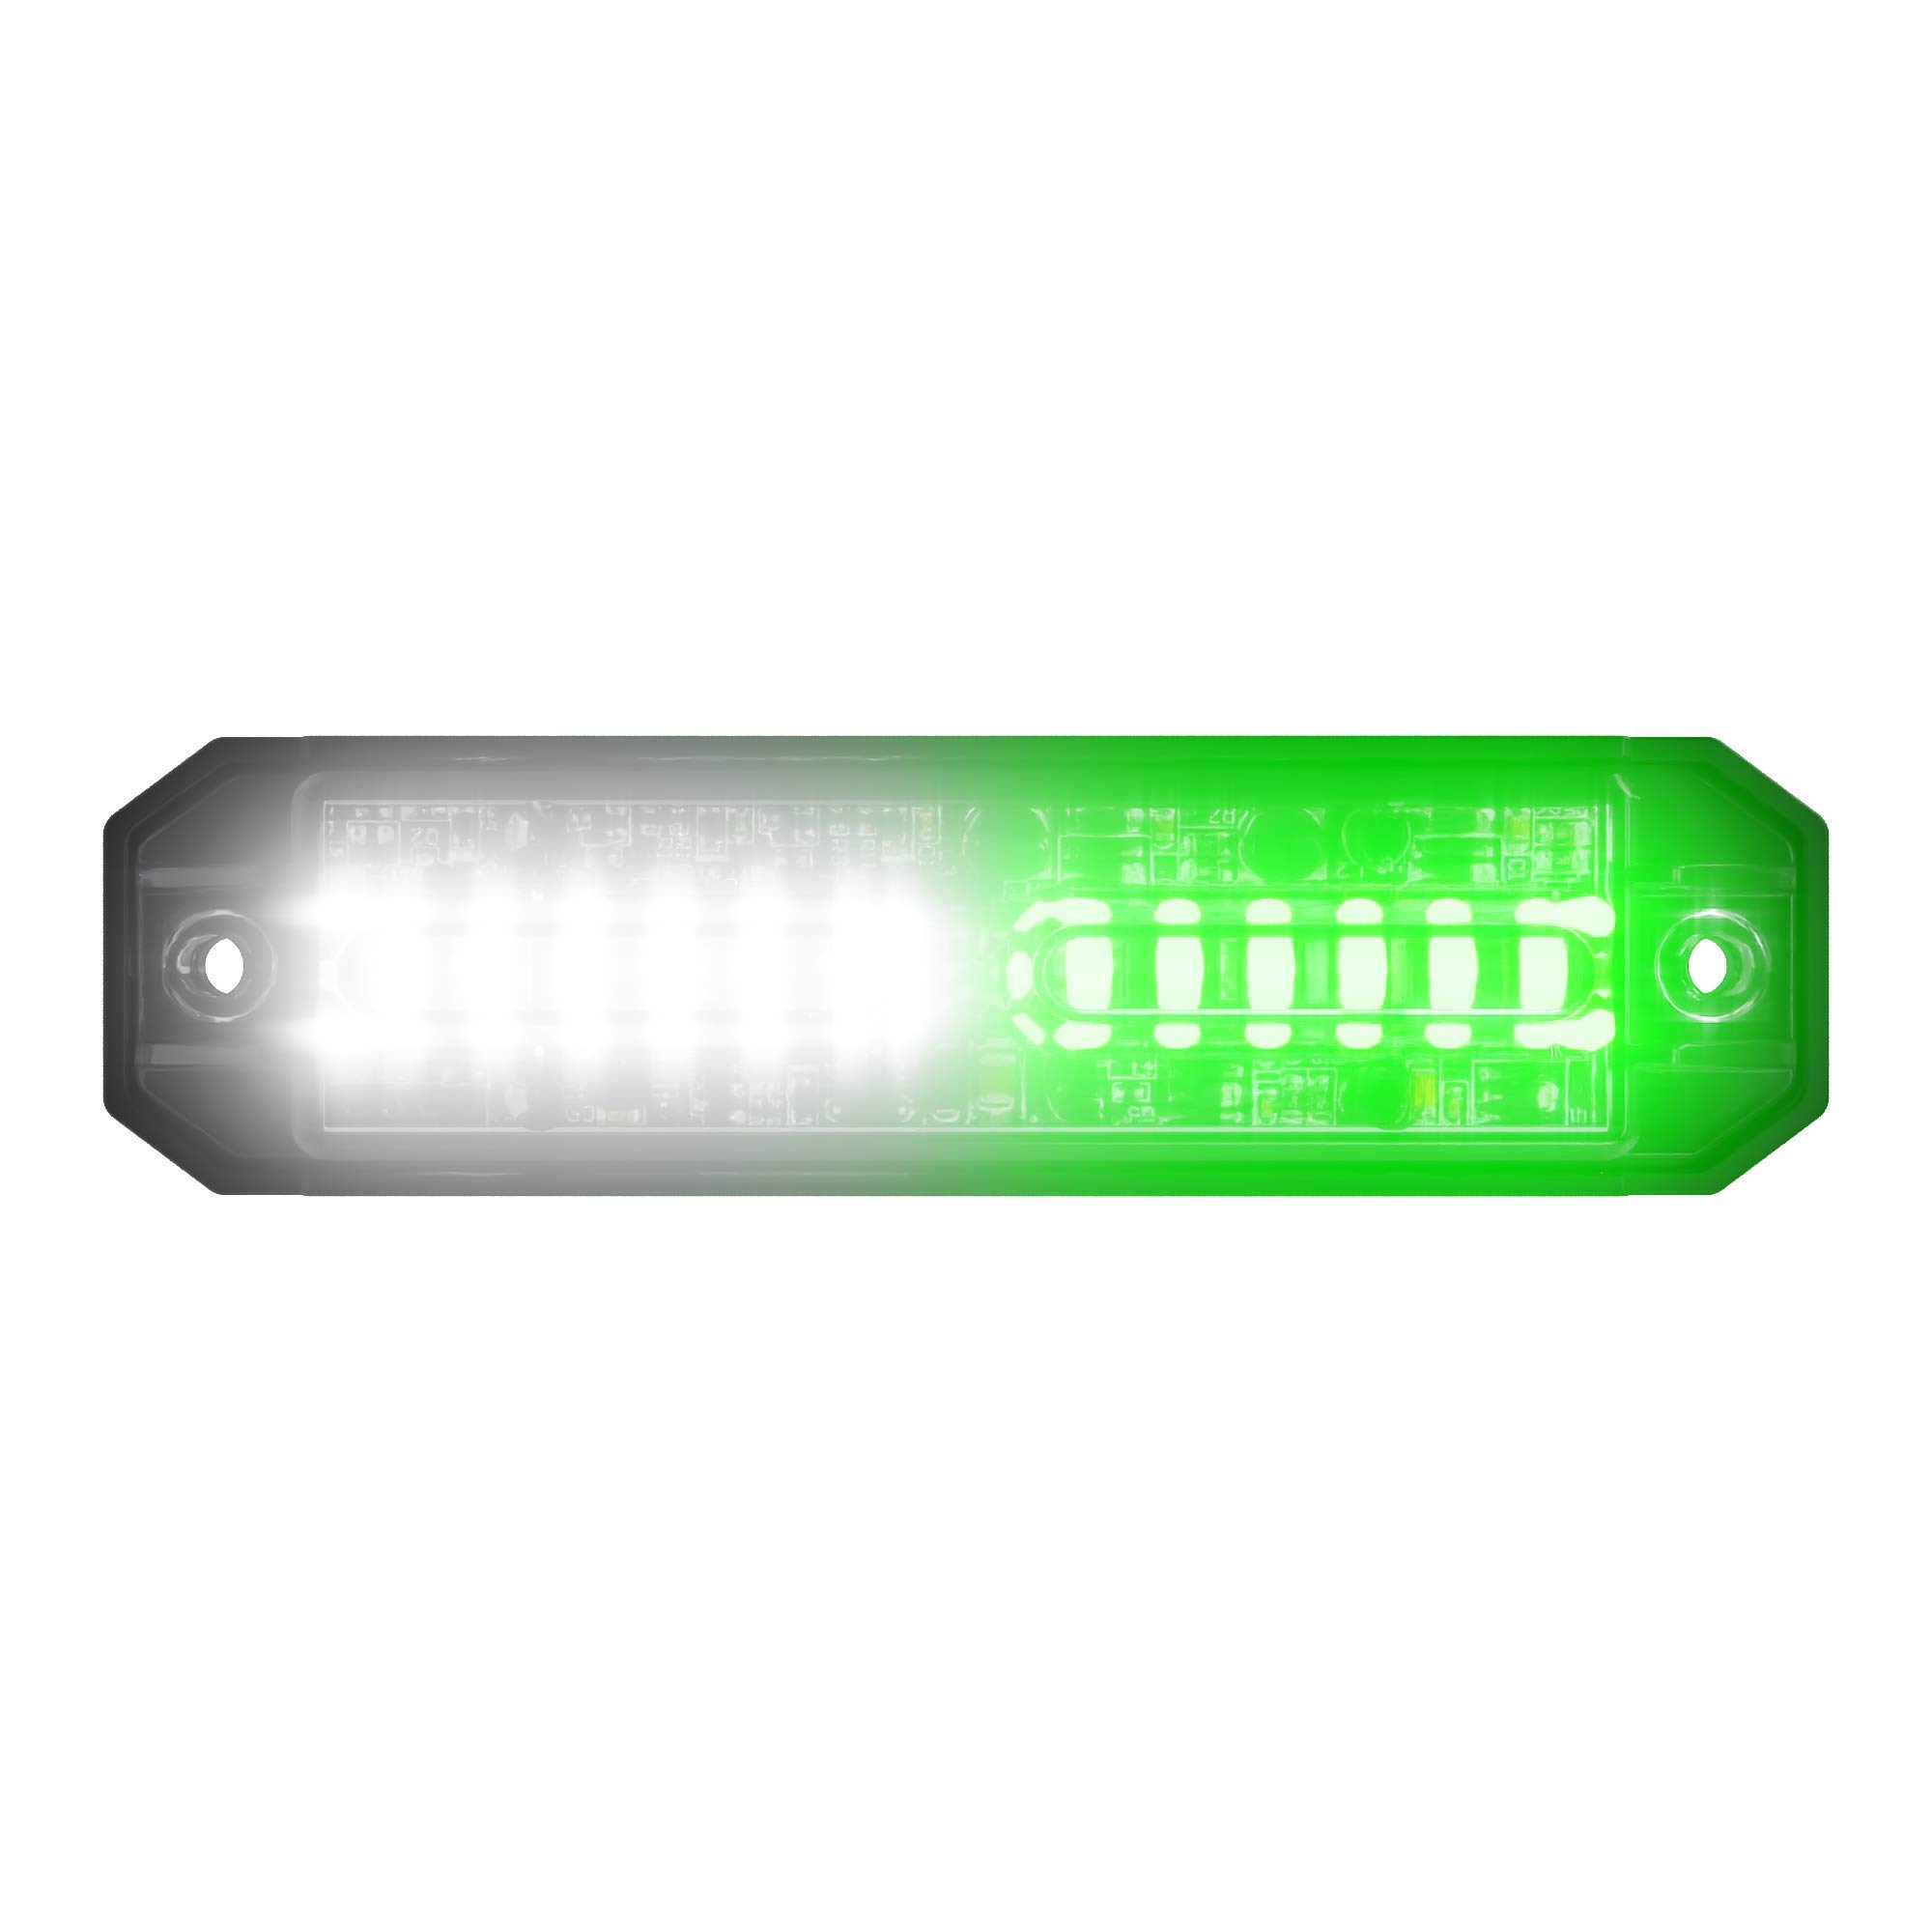 Abrams Ultra Series [Green/White] 36W - 12 LED [SAE Class-1] Security Patrol Vehicle Truck [Dual Color] LED Grille Light Head Surface Mount Strobe ...